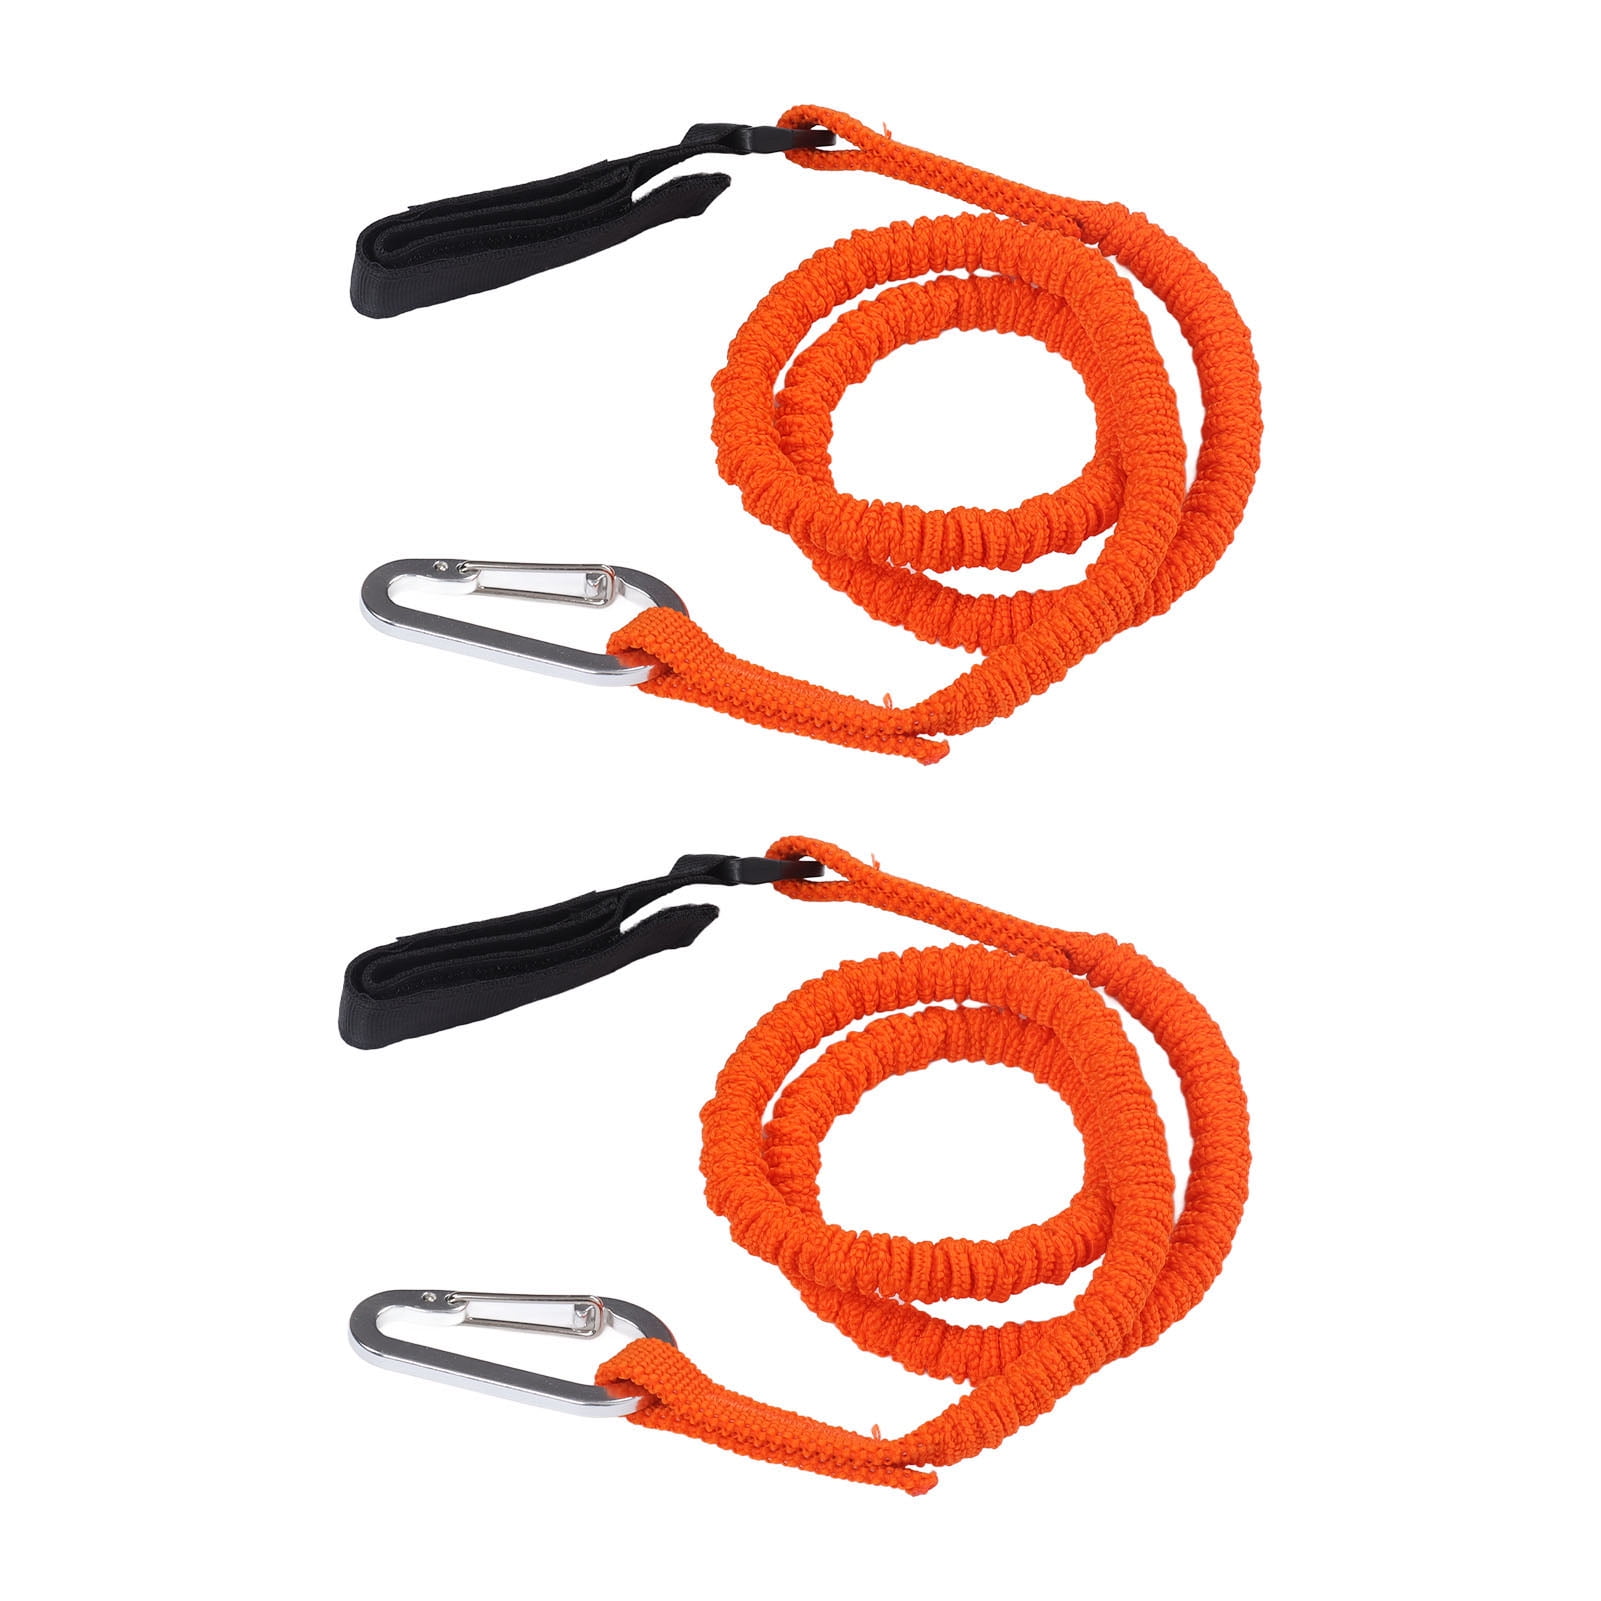 Made in the USA Paddle Leash and Rod Leash Set with 2 Leashes and 1 Carabiner Built to last 